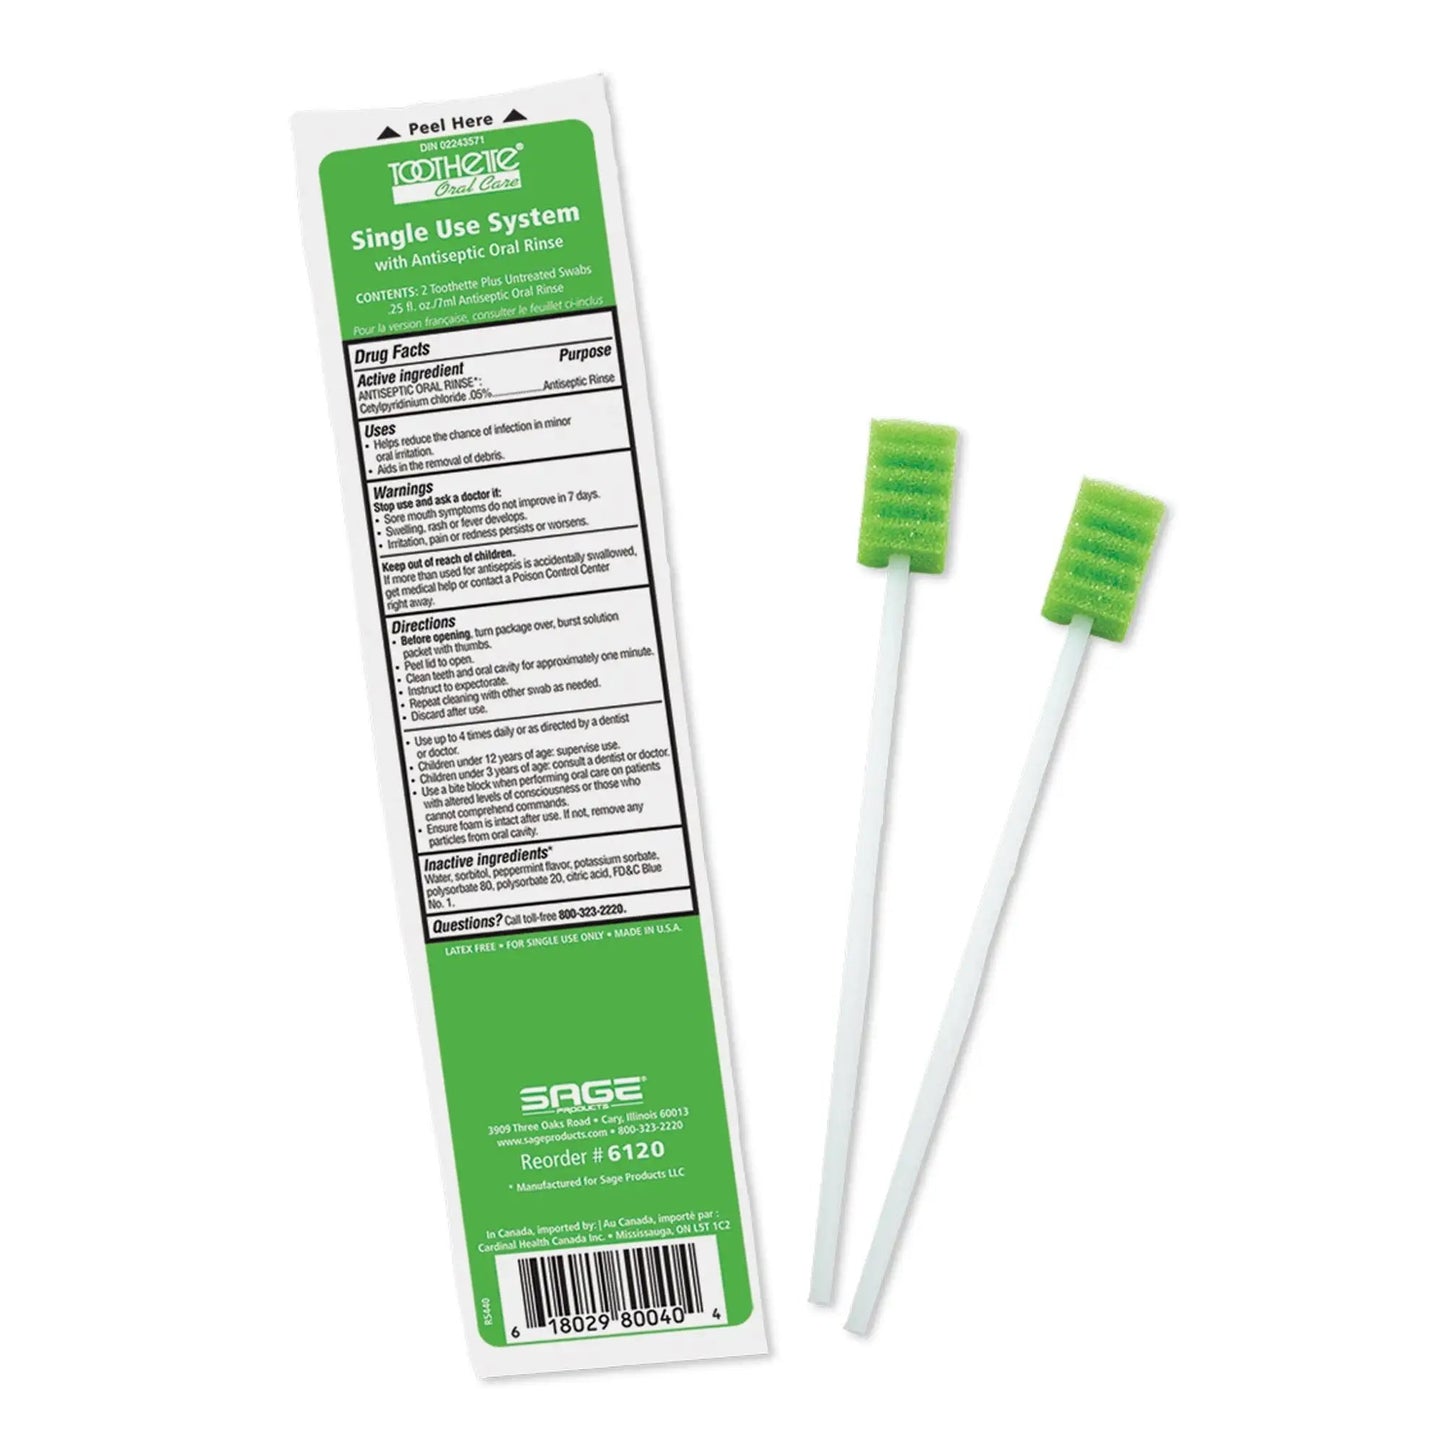 Toothette Plus Swabs with Antiseptic Oral Rinse